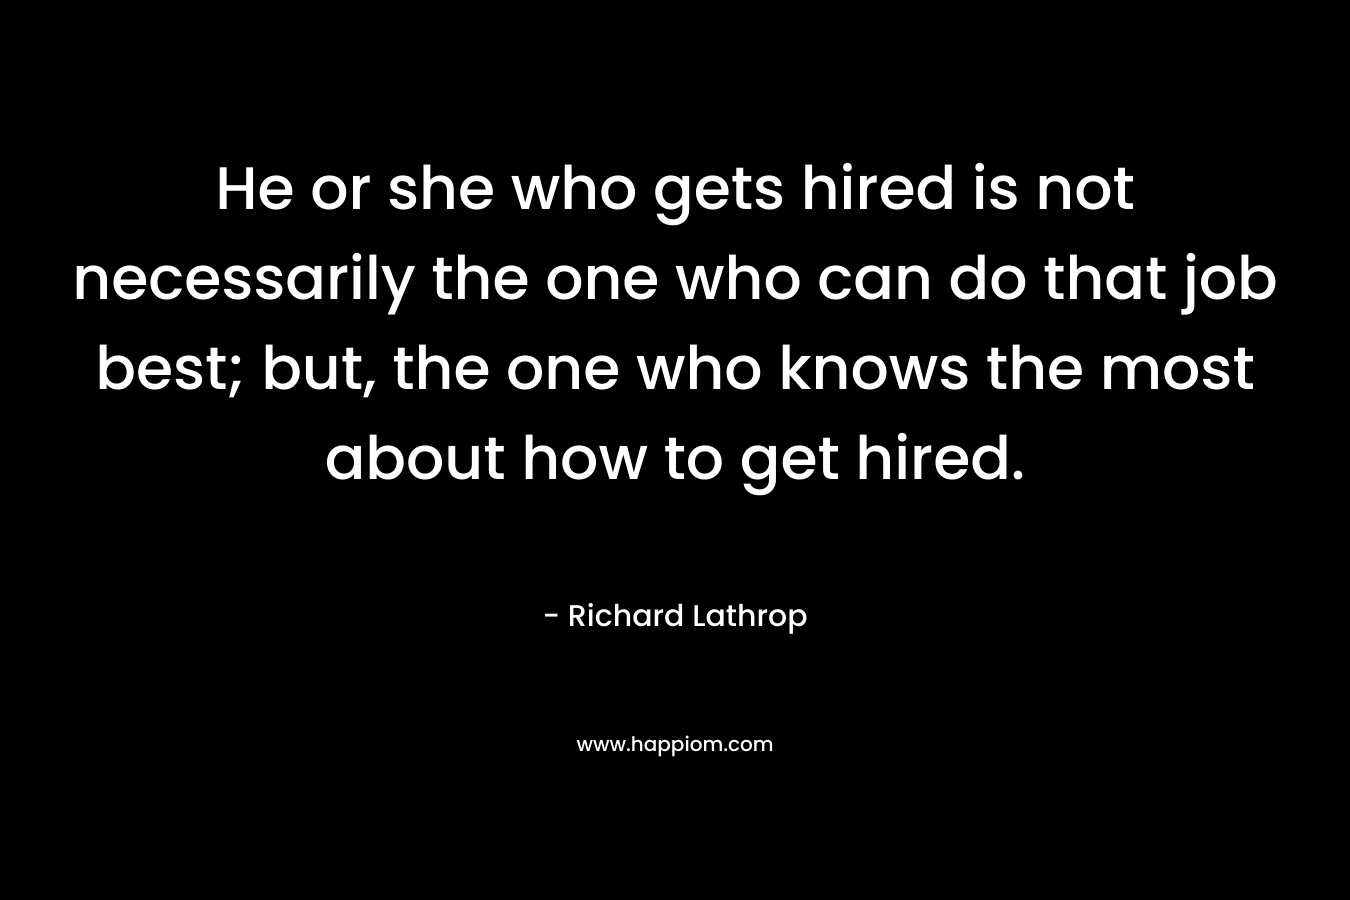 He or she who gets hired is not necessarily the one who can do that job best; but, the one who knows the most about how to get hired.